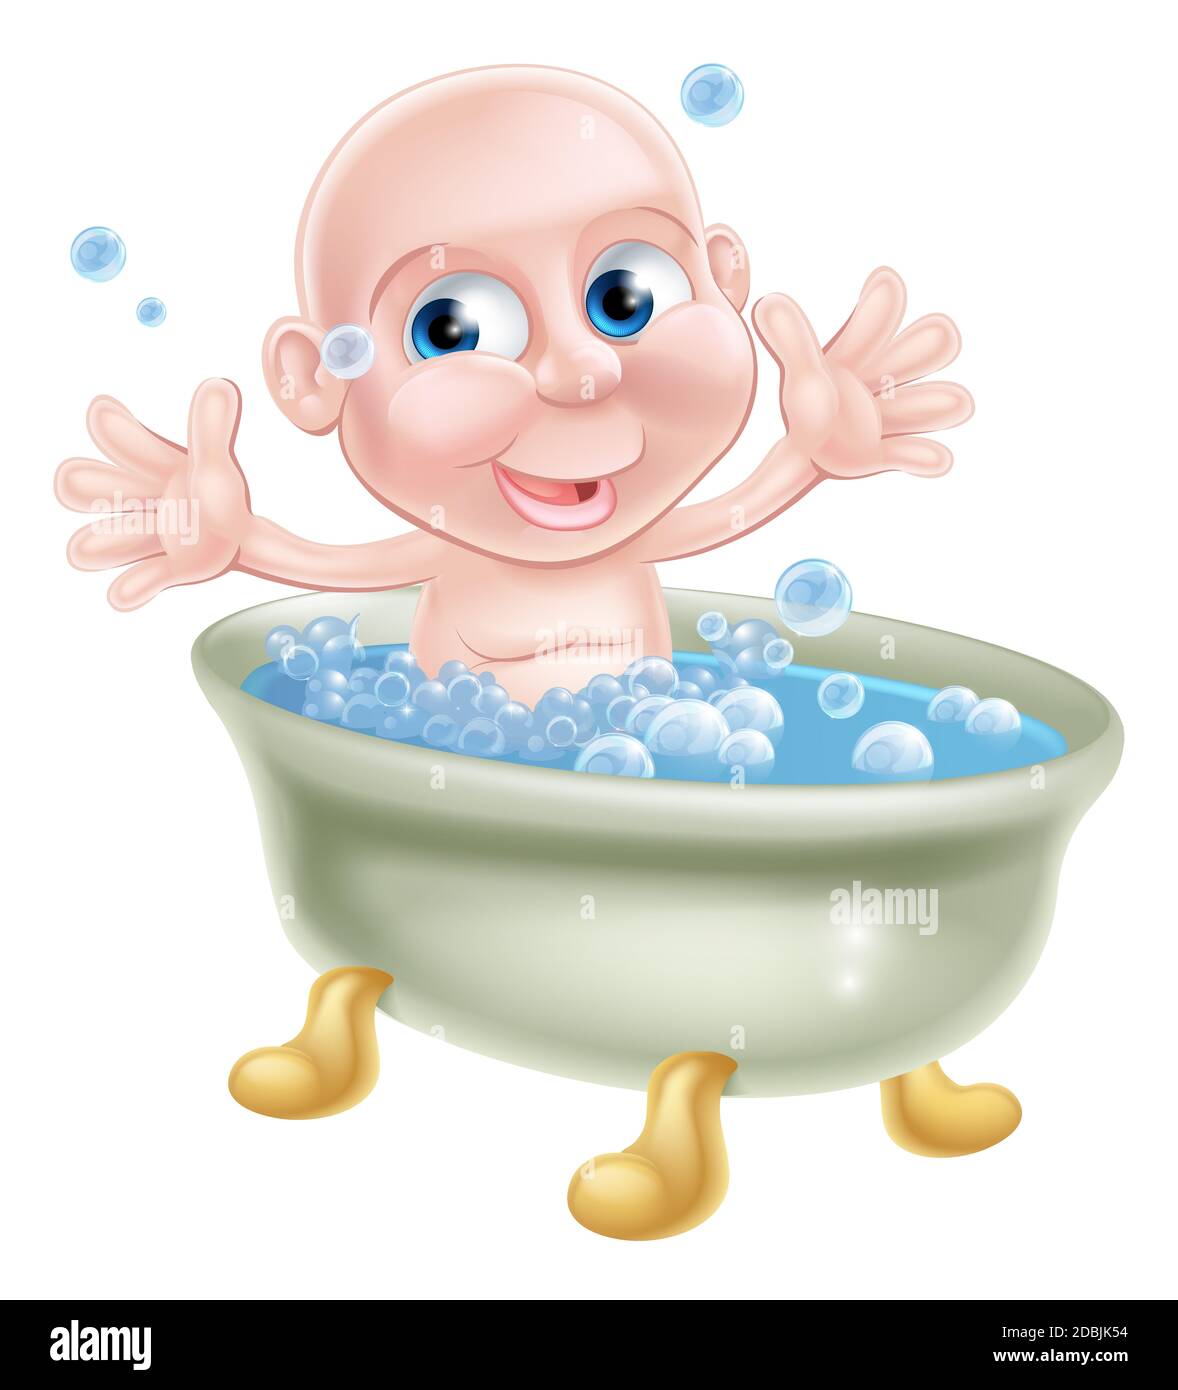 An illustration of a happy cute cartoon baby in a bubble bath waving Stock Photo